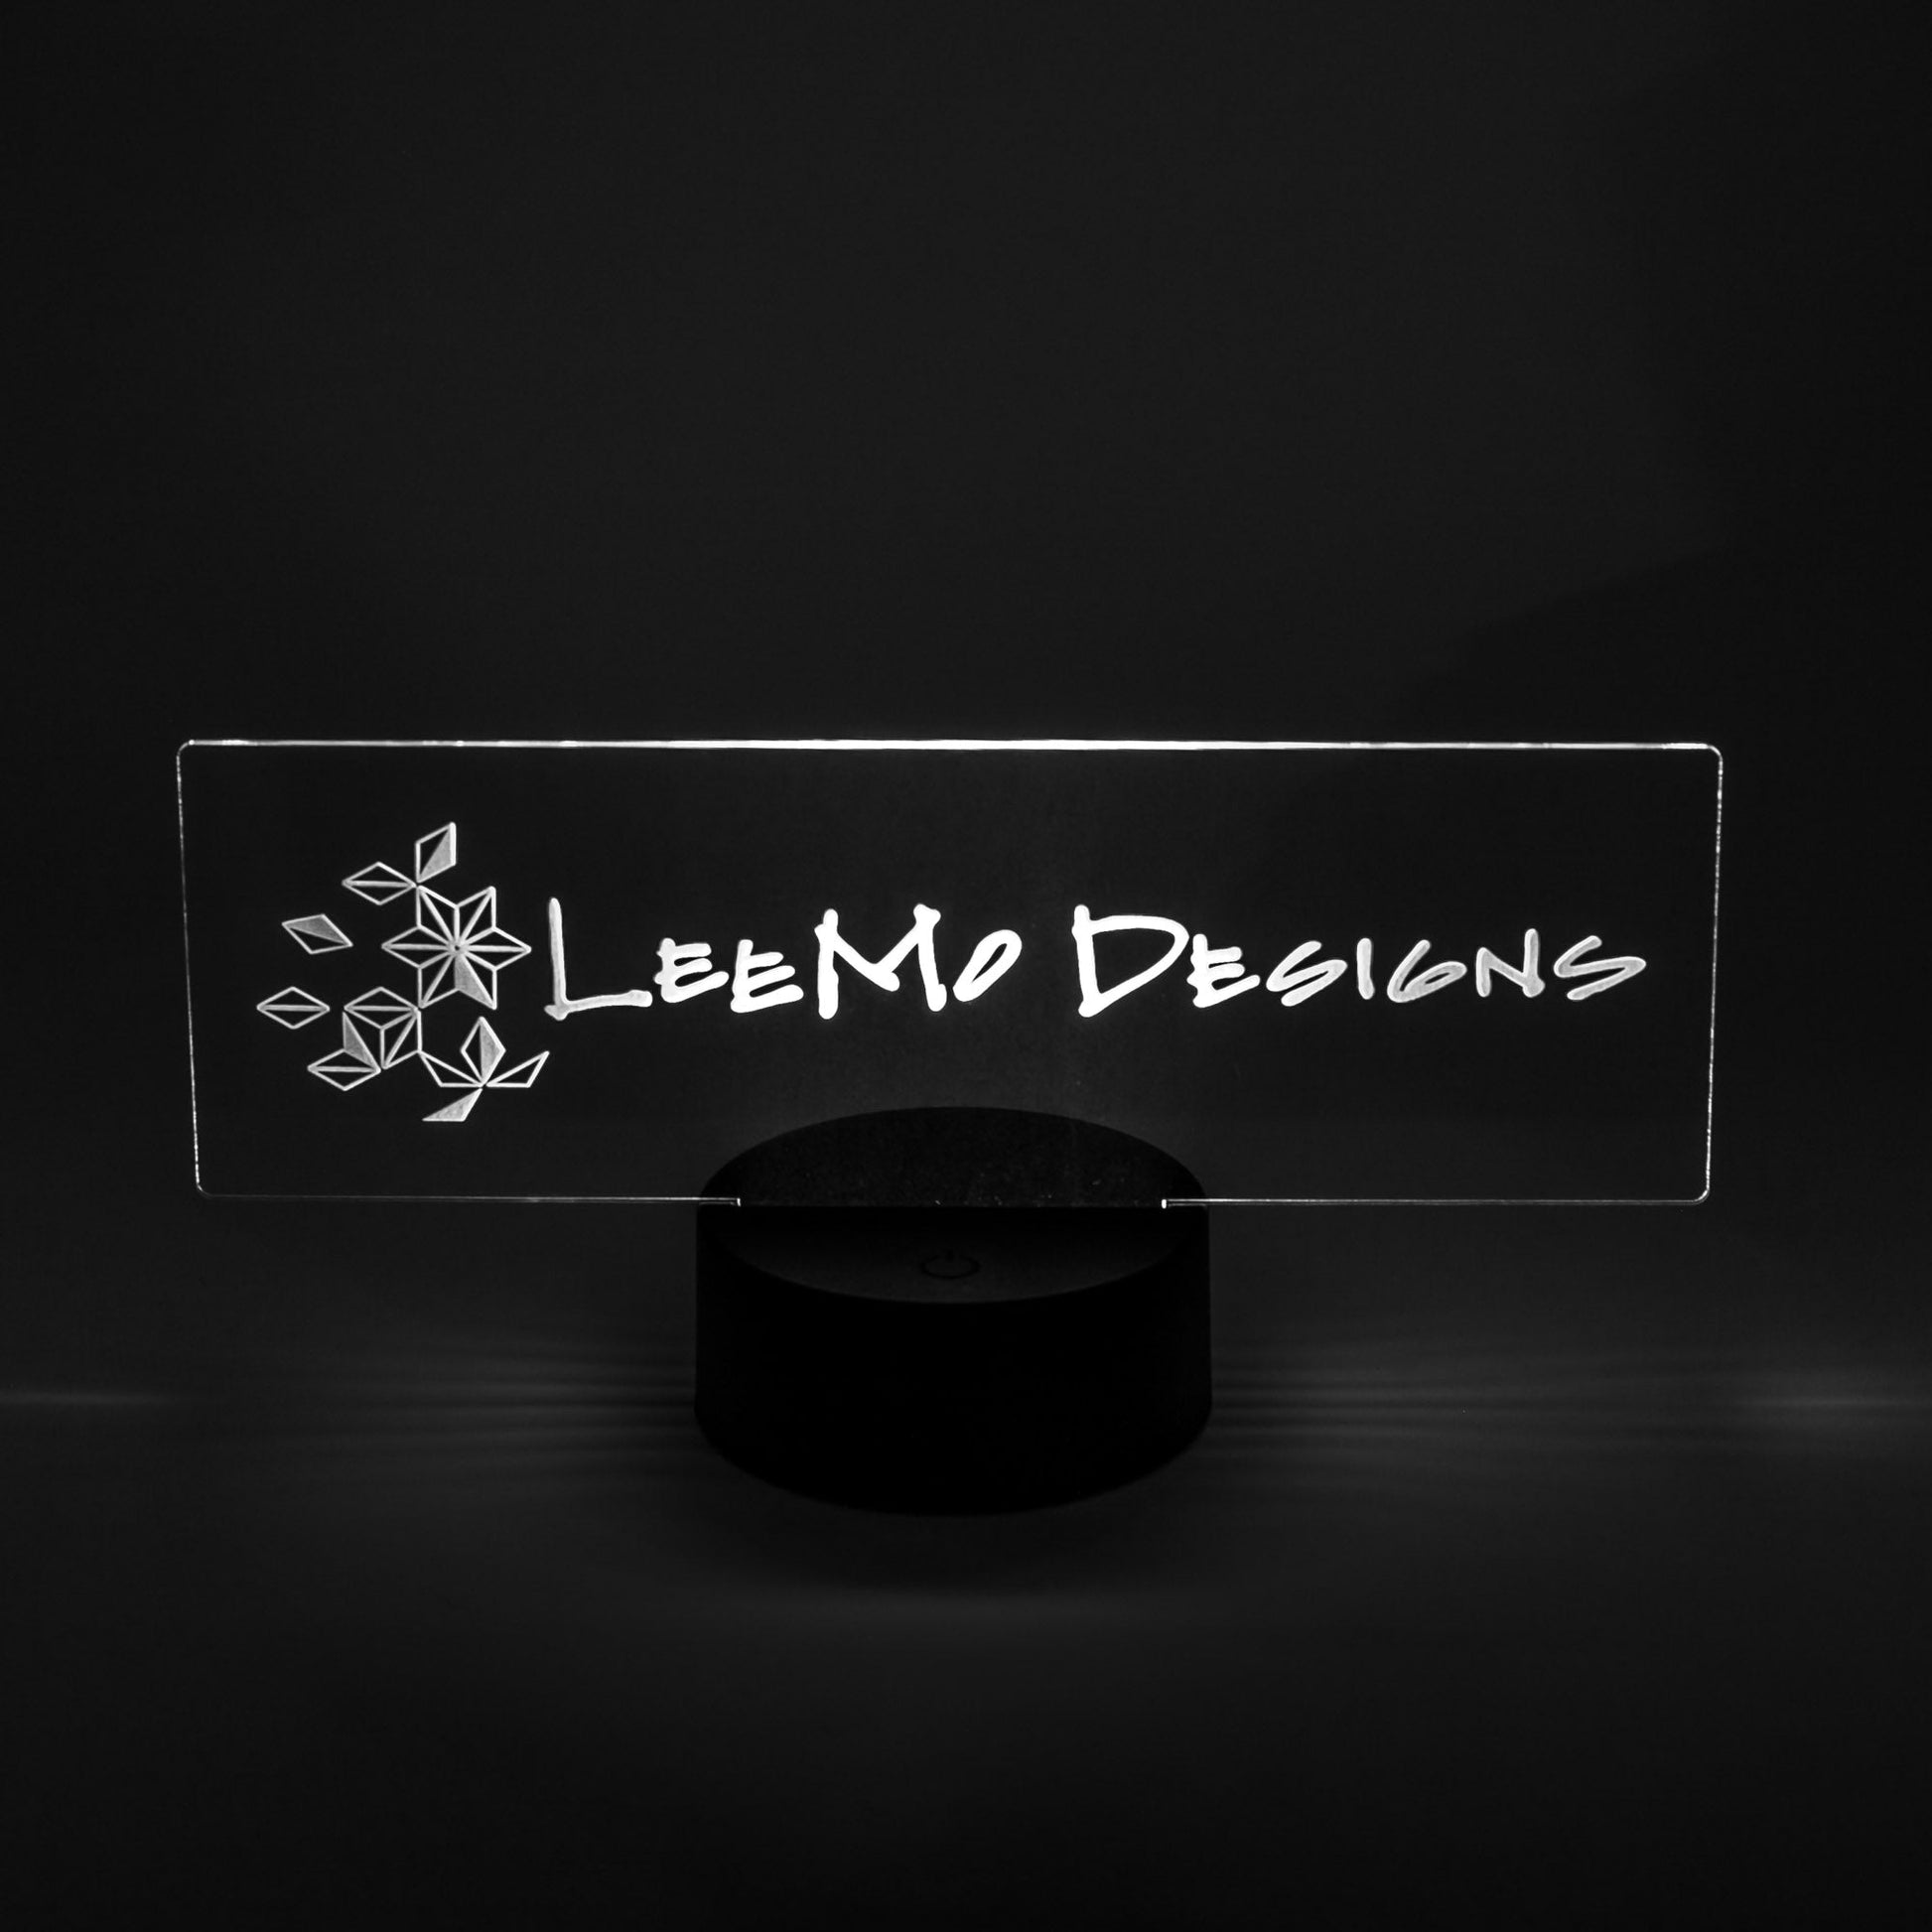 Custom sign led for business - laser cut acrylic LED sign by LeeMo Designs in Bend Oregon